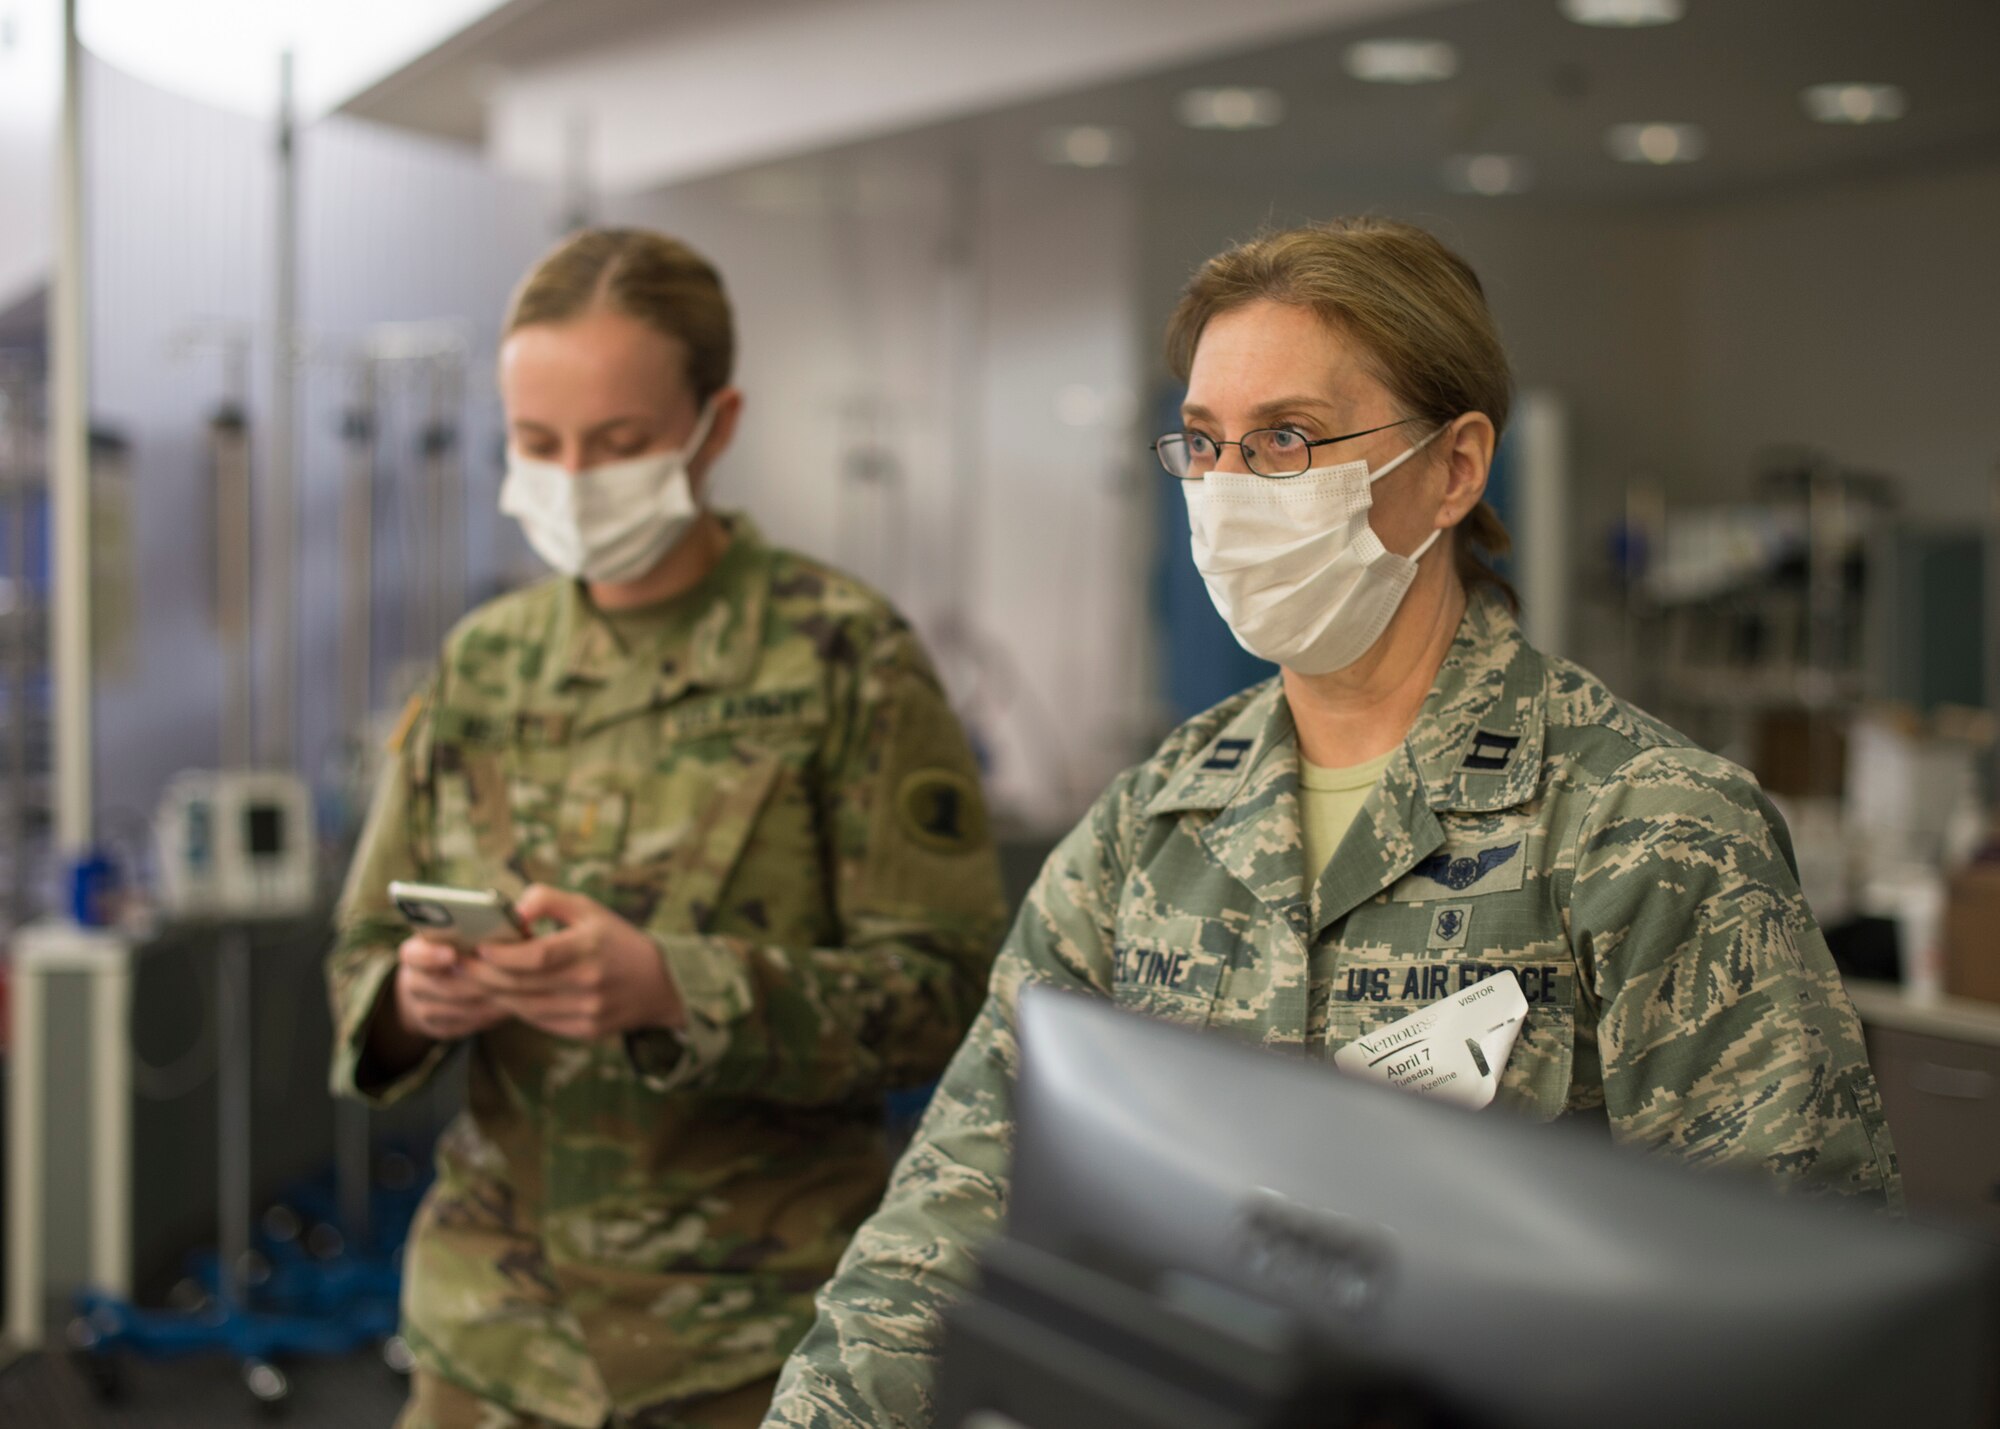 U.S. Air Force Capt. Yvonne Azeltine, 166th Medical Group nurse, participates in a training exercise at an alternate care site at A.I. DuPont Hospital, Wilmington, Del., April 7, 2020. Under command of the Governor of the State of Delaware, the 166th Airlift Wing provides trained personnel and equipment for various humanitarian missions to protect life and property and preserve peace, order and public safety, under competent orders of state authorities. (U.S. Air National Guard Photo by Staff Sgt. Katherine Miller)